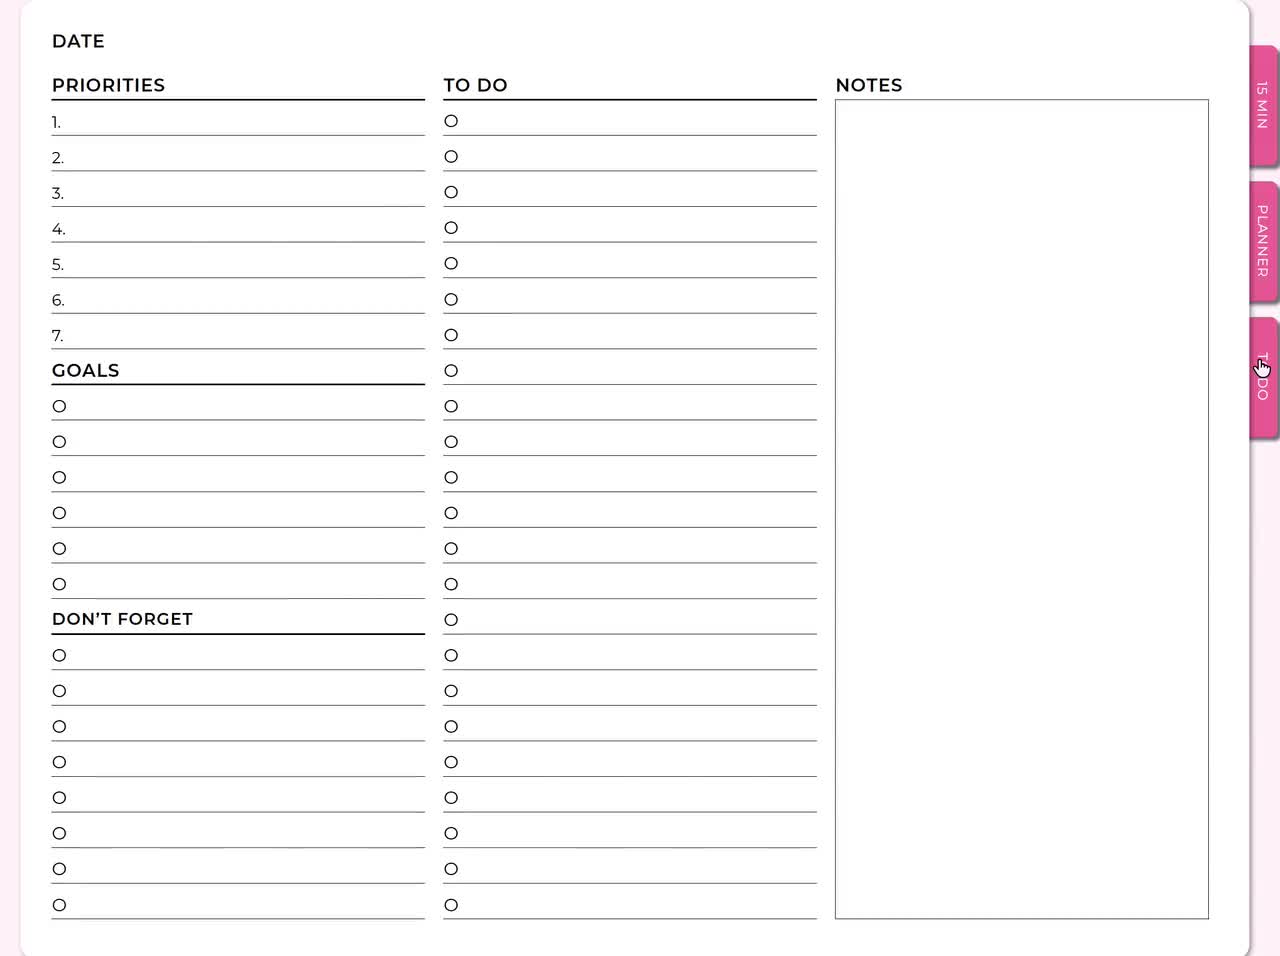 daily schedule template 15 minute intervals